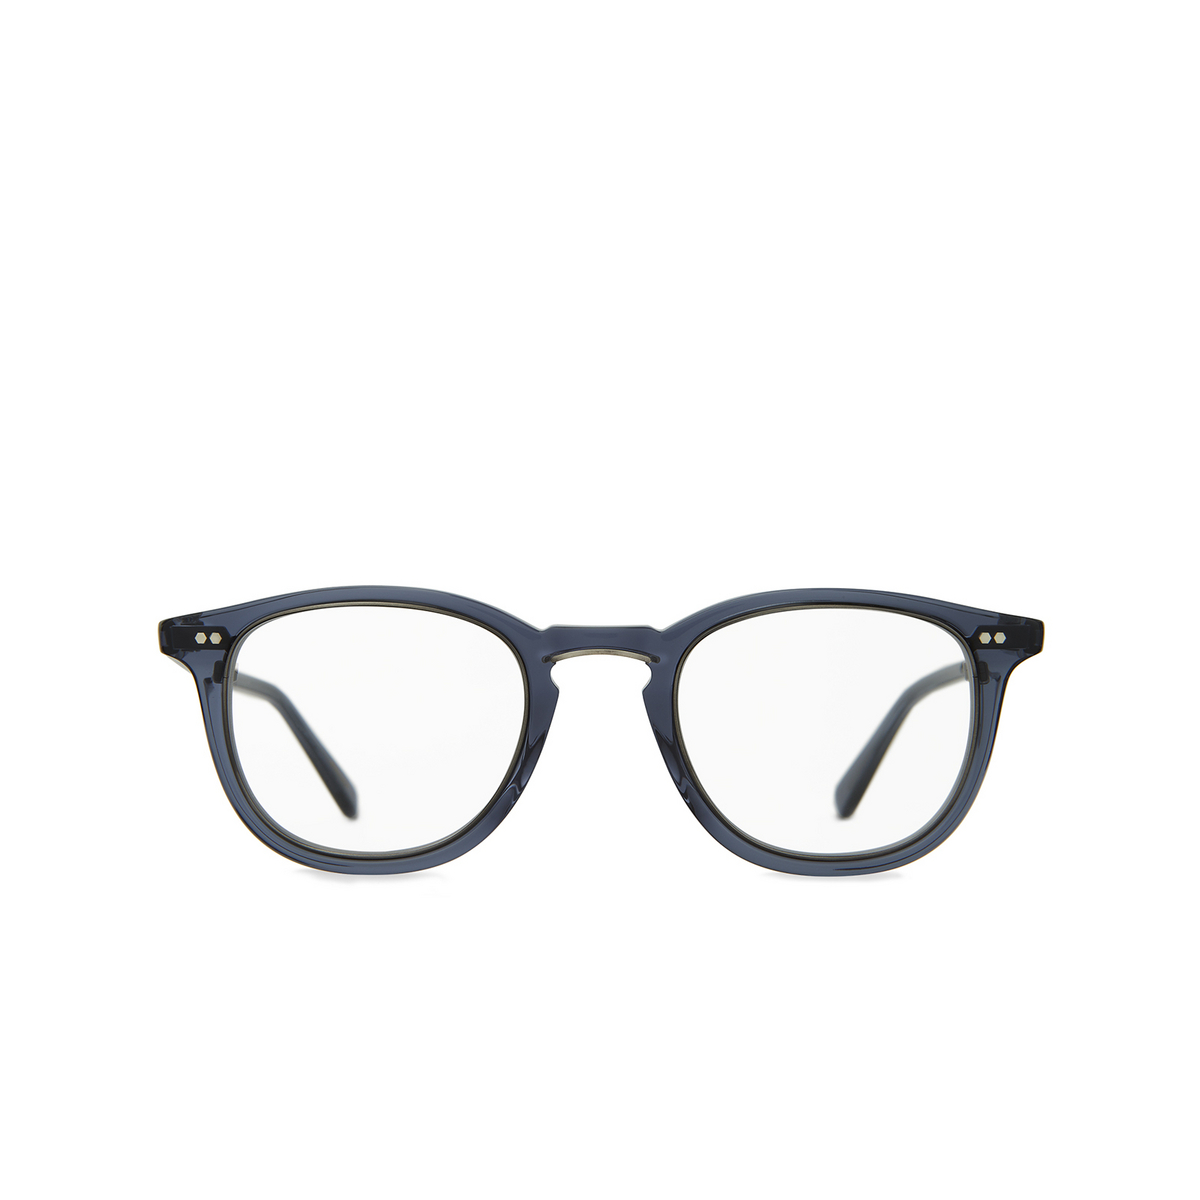 Mr. Leight® Square Eyeglasses: Coopers C color Midnight - Antique Platinum Mid-antplt - front view.